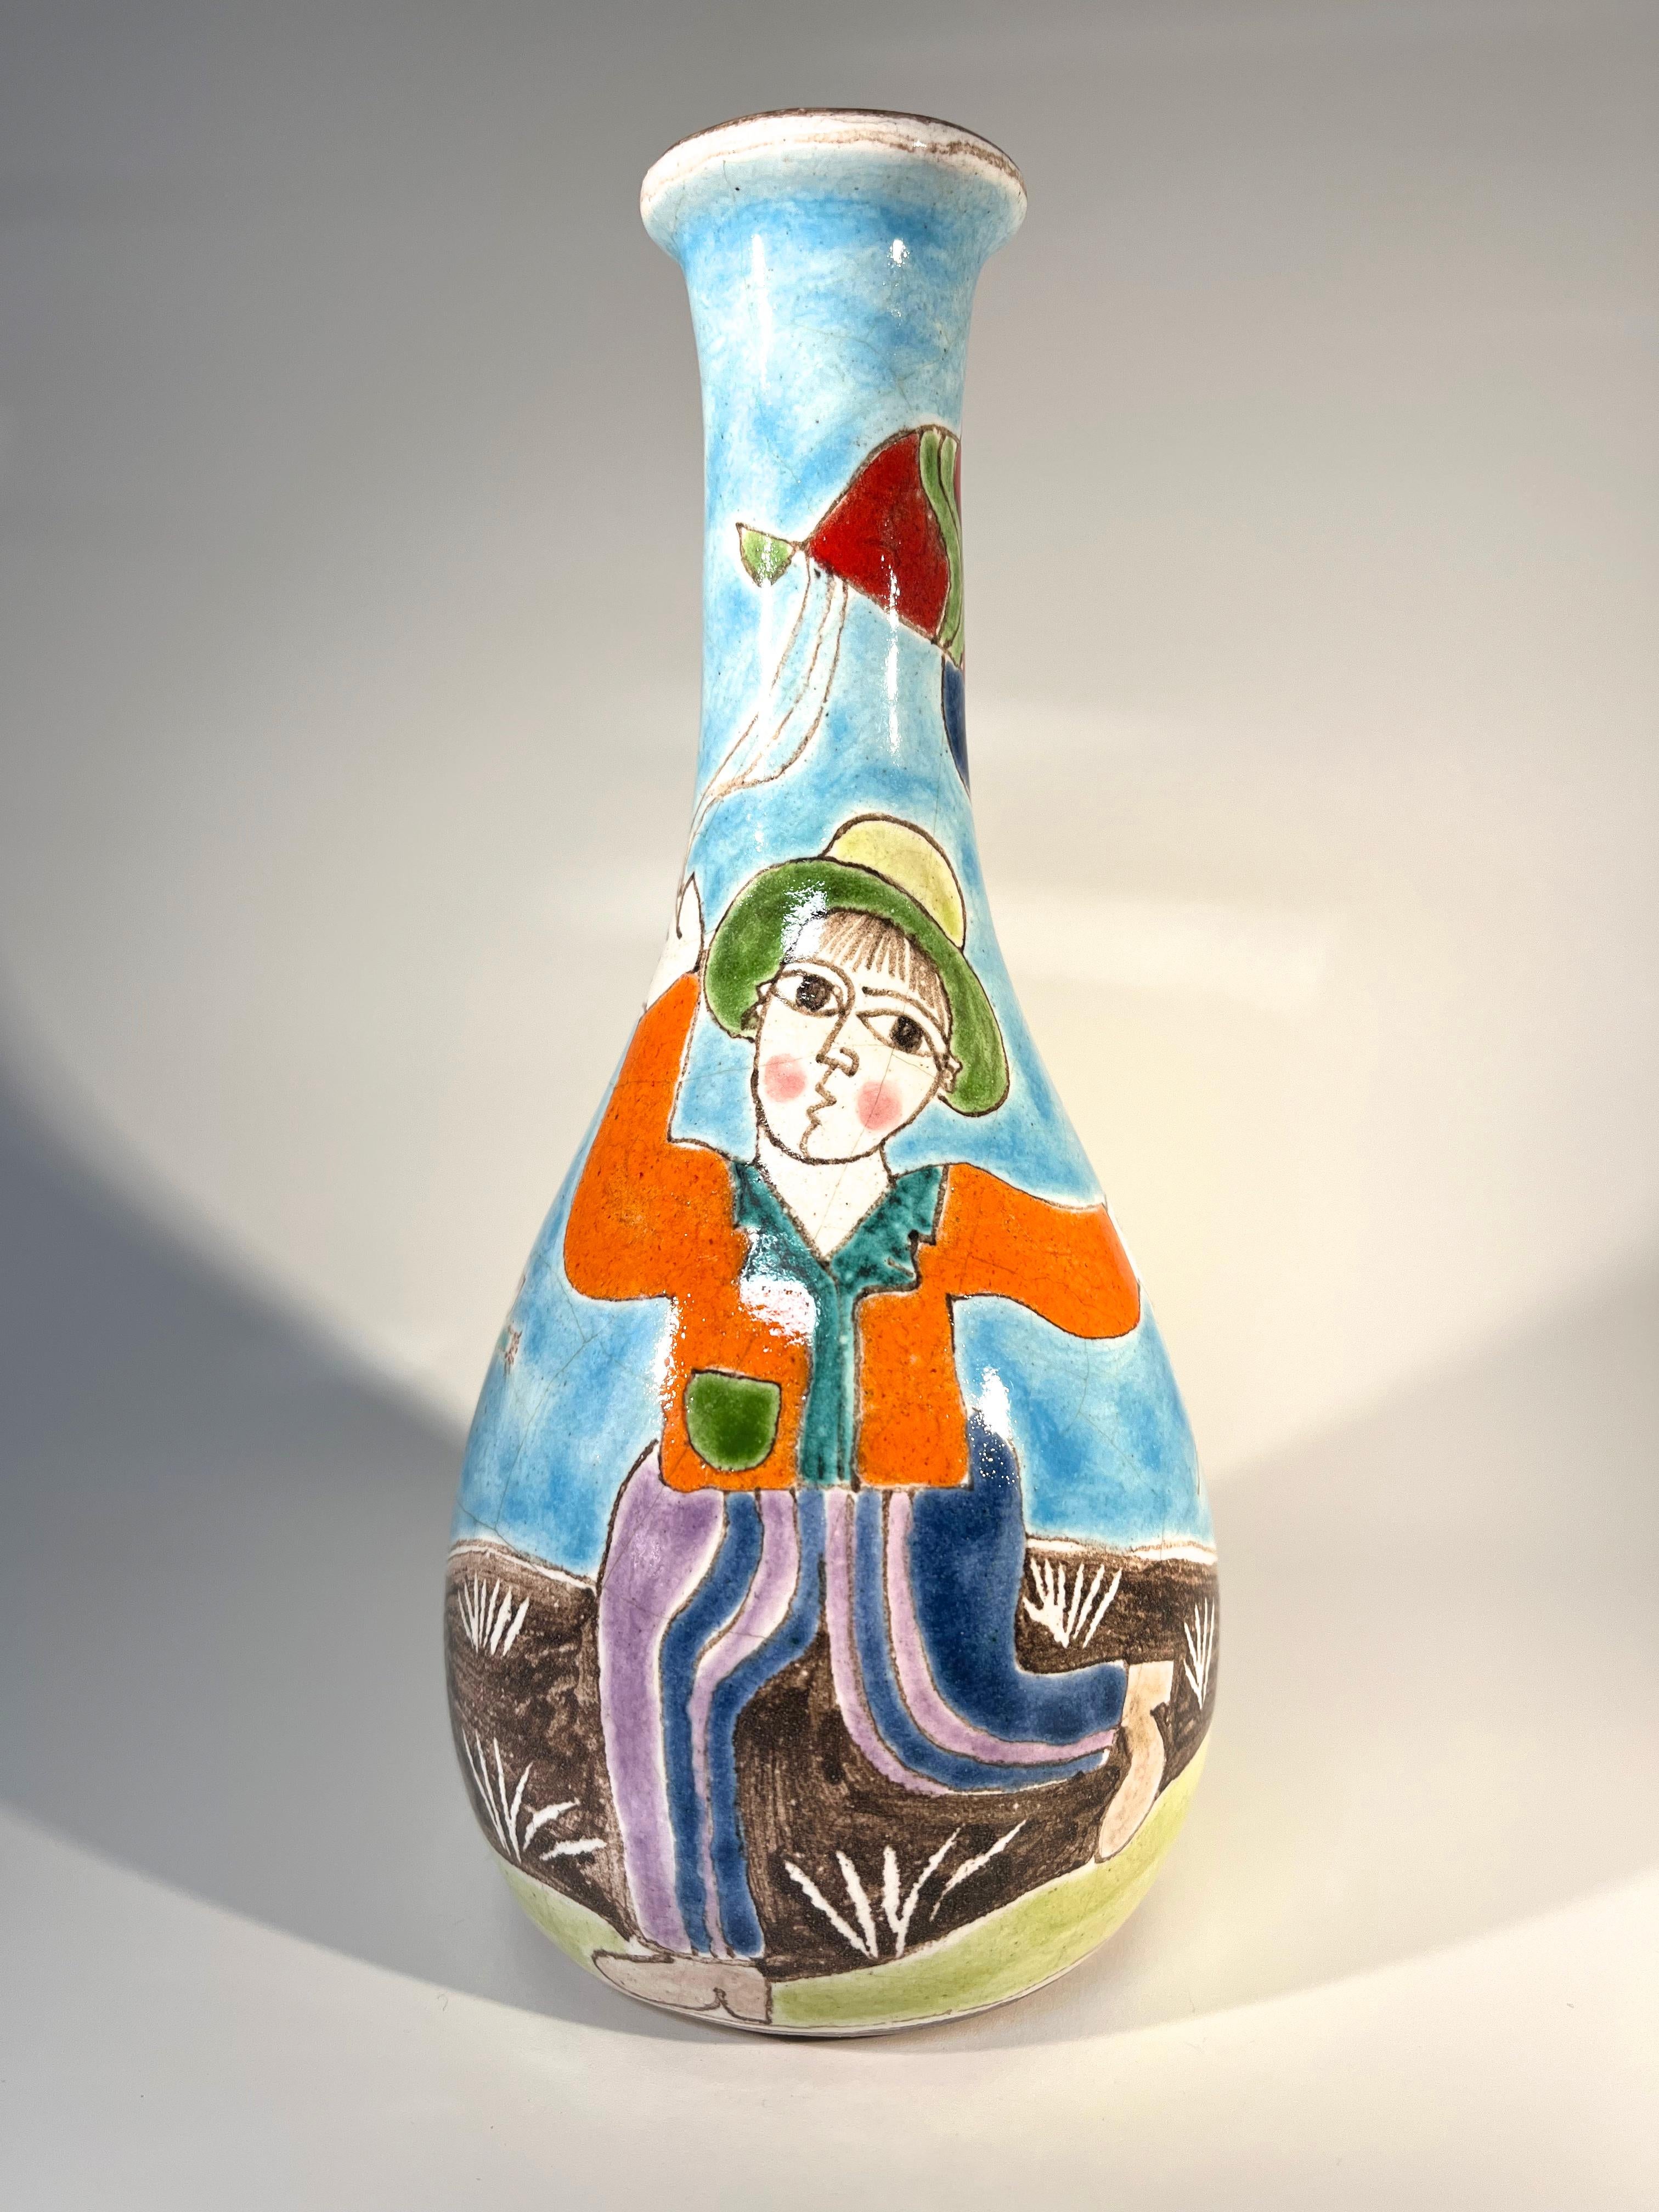 Original and signed by Giovanni DeSimone, this hand-painted vase is full of colour and fun
Hand painted scene of Italian children playing with balloons
A terrific piece of Giovanni at his best
Signed to front by Giovanni DeSimone
Signed DeSimone